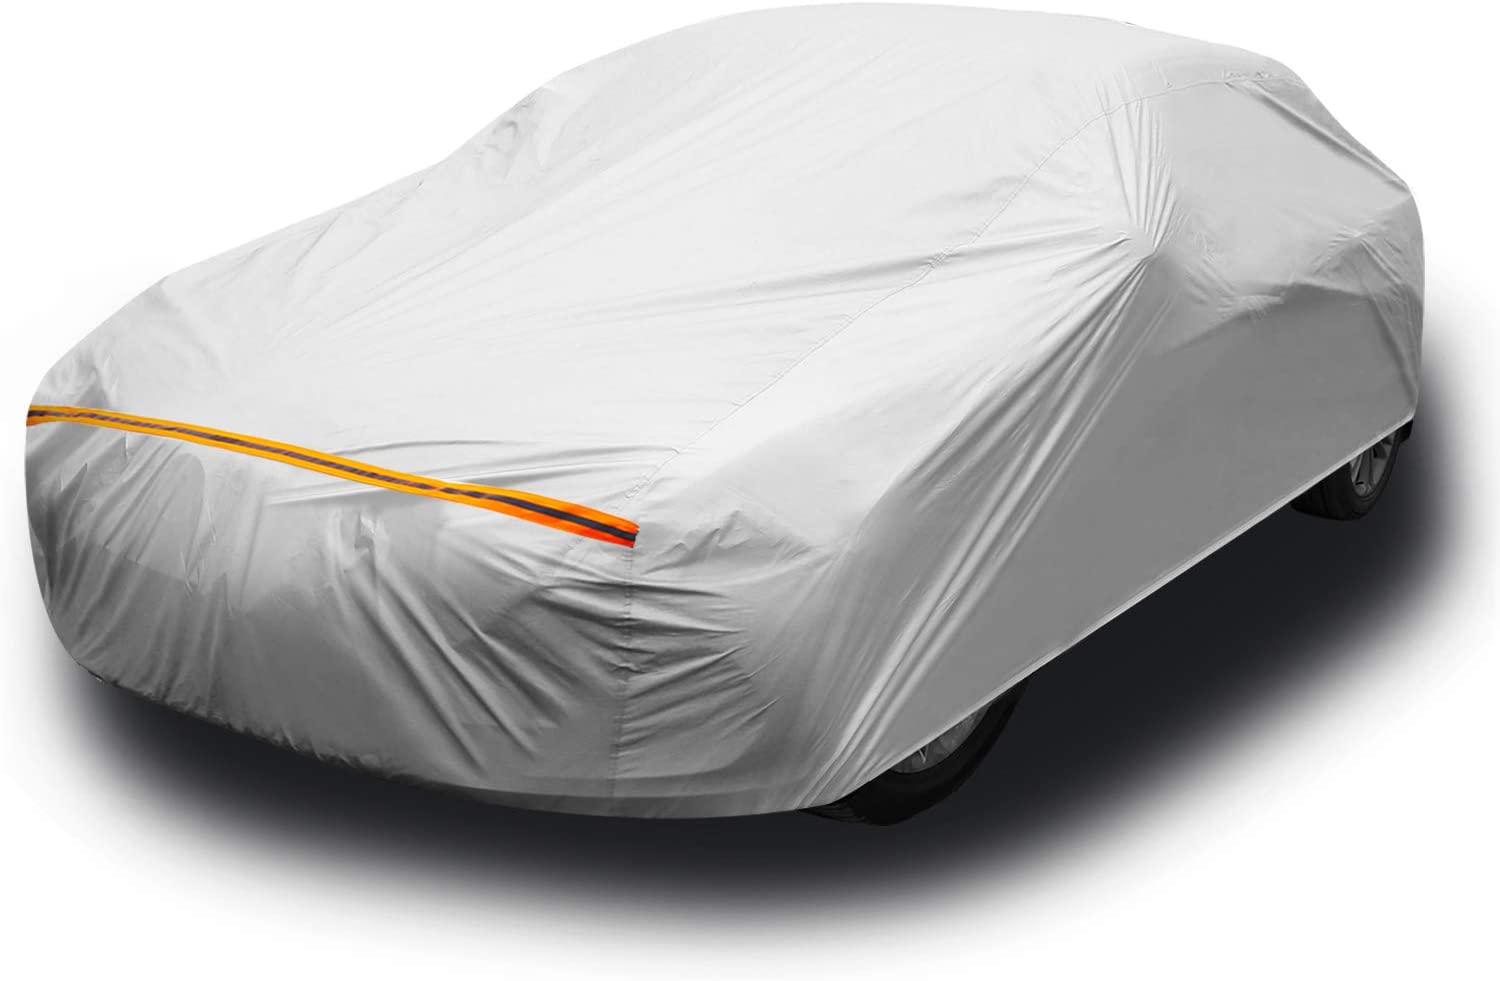 Ohuhu Best car cover outdoor